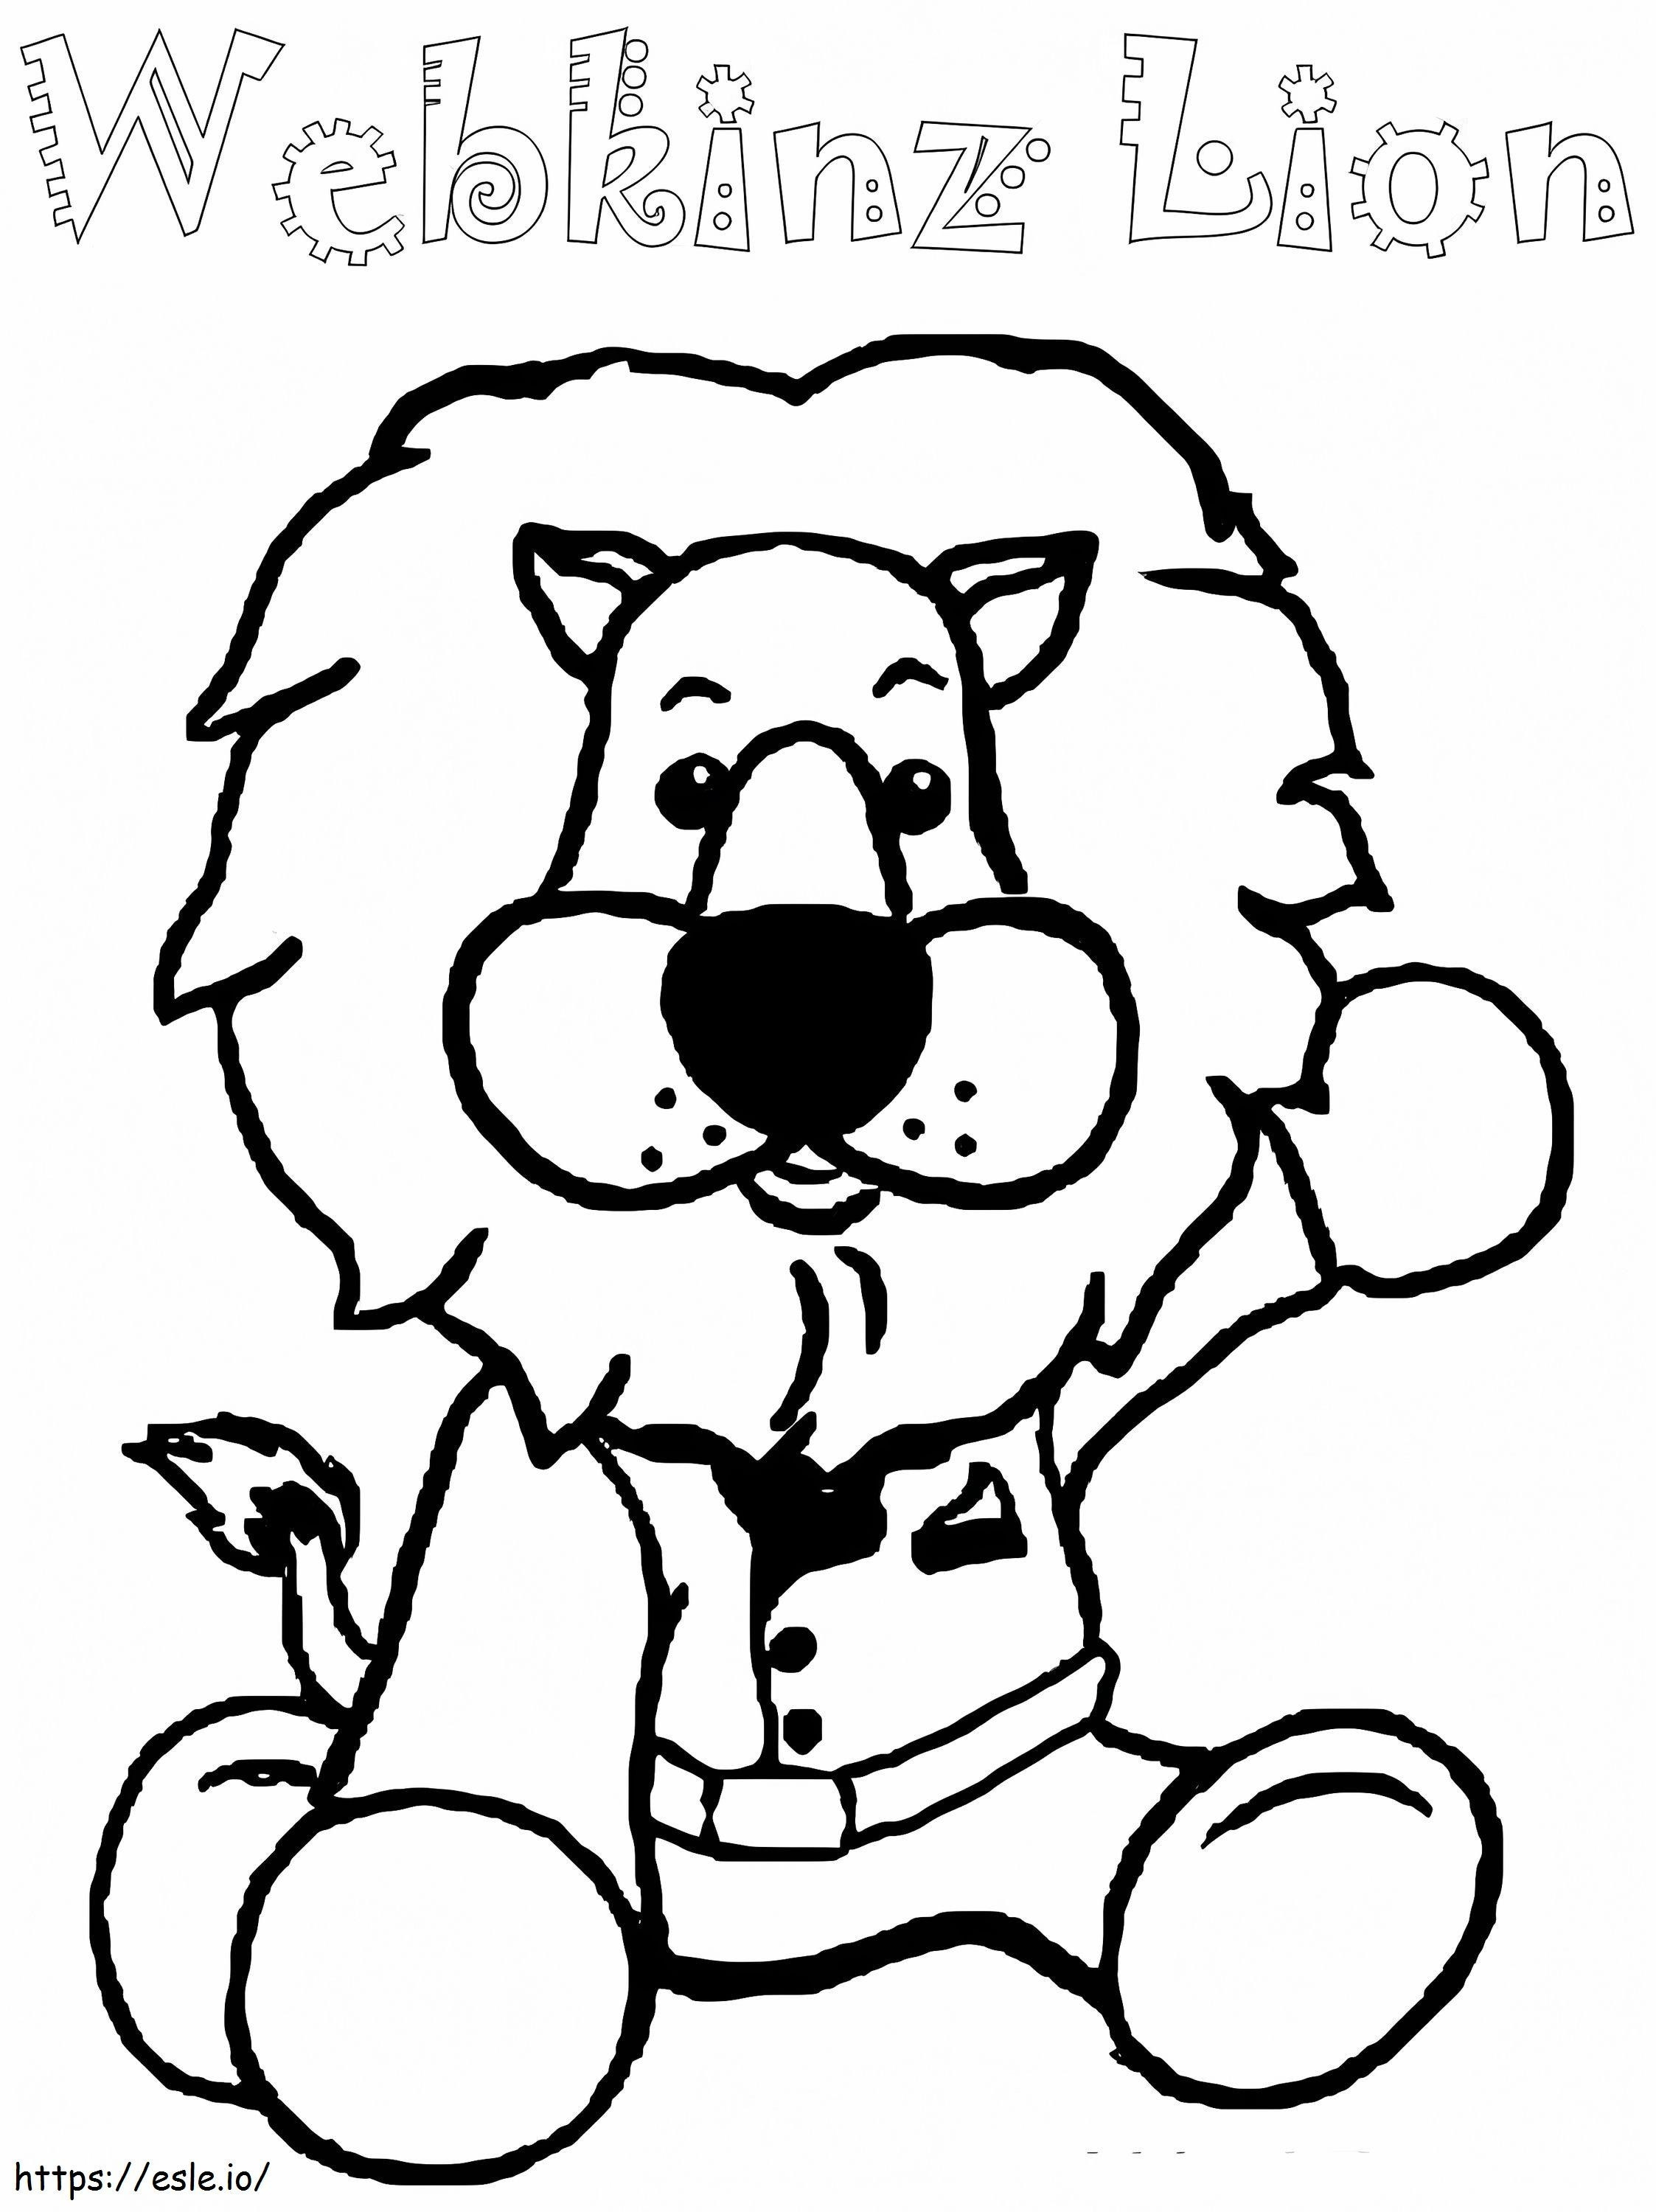 Lion Webkins coloring page